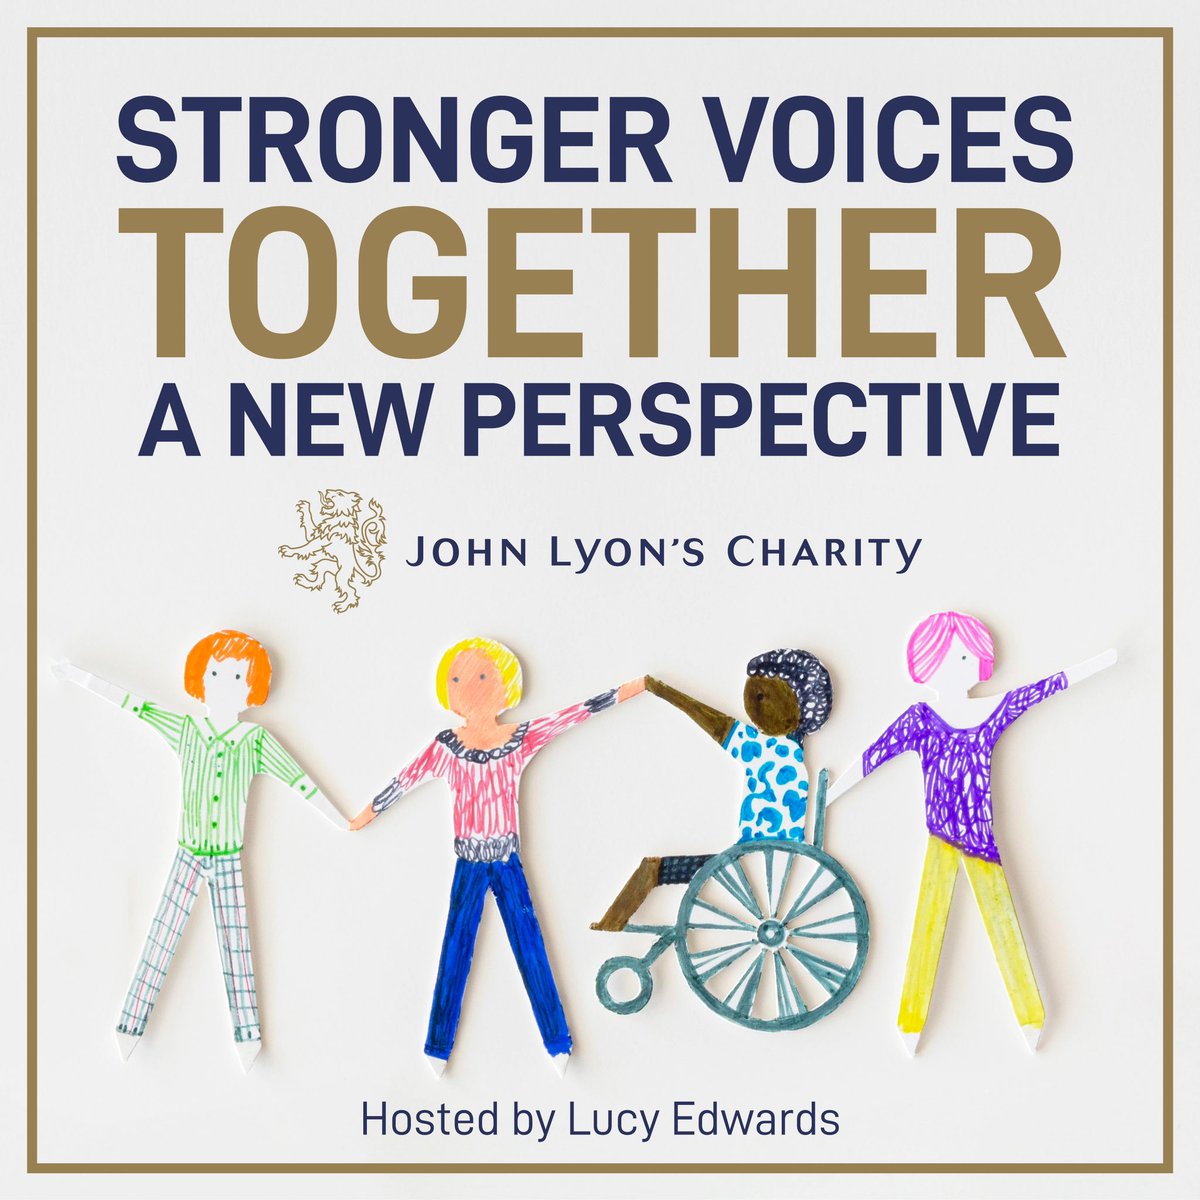 We are delighted to introduce Stronger Voices Together, a podcast series dedicated to exploring the diverse world of disability and inclusion, brought to you by John Lyon’s Charity and hosted by blind broadcaster and disability activist @lucyedwards! vimeo.com/933886843